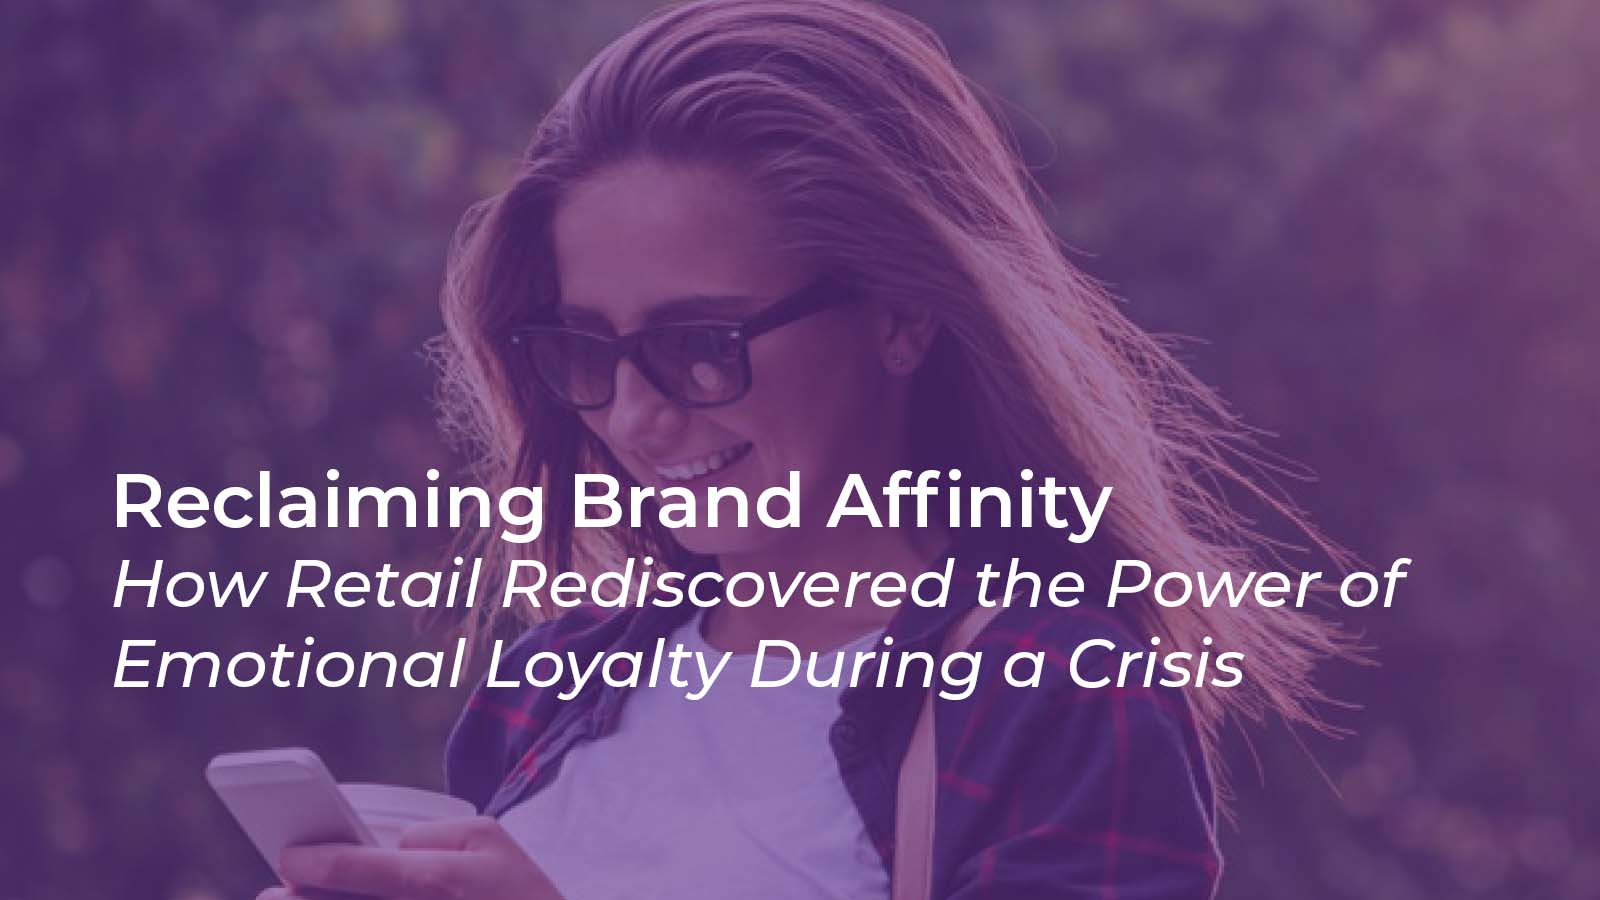 Brand Affinity Industry Brief 2020